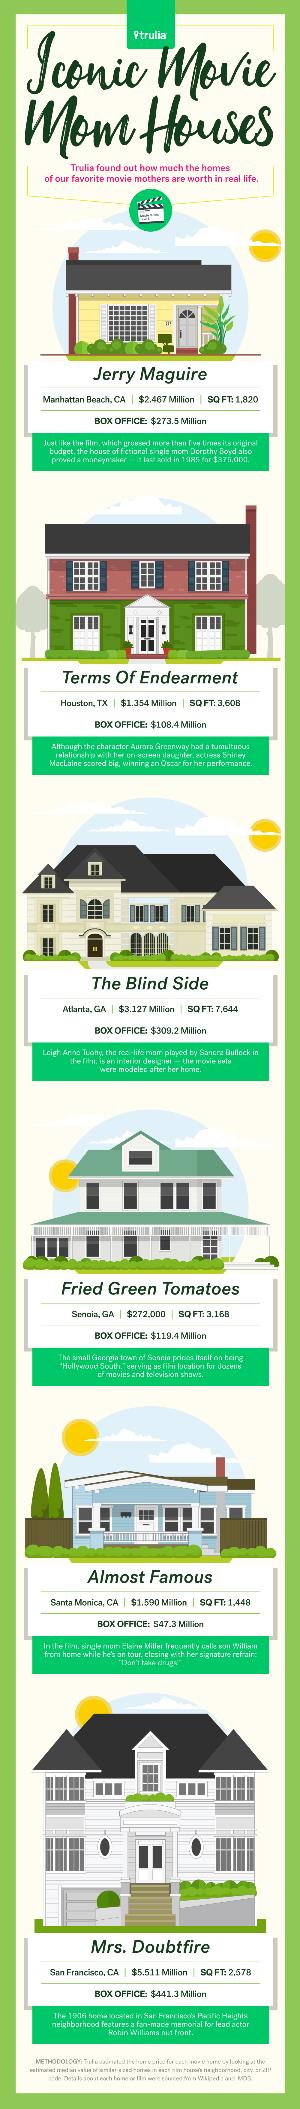 Trulia_Mothers_Day_Houses_infog